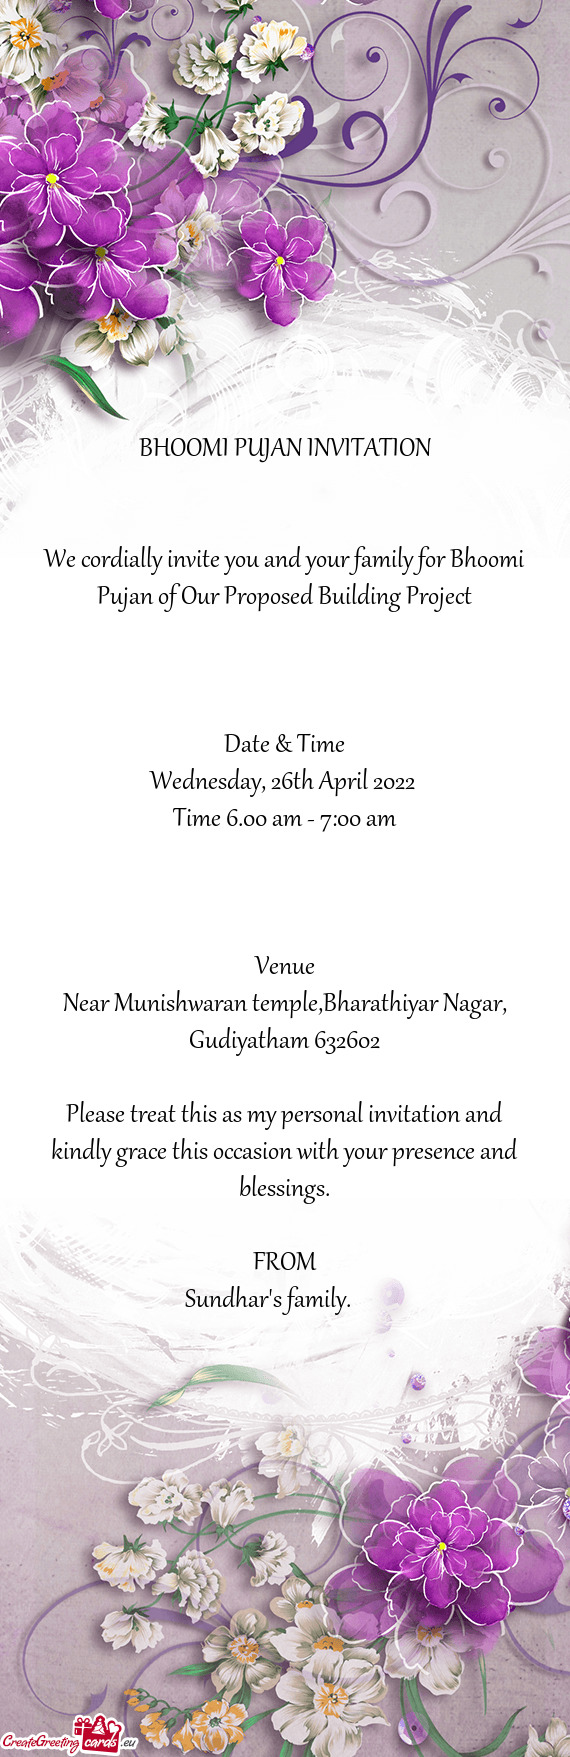 We cordially invite you and your family for Bhoomi Pujan of Our Proposed Building Project